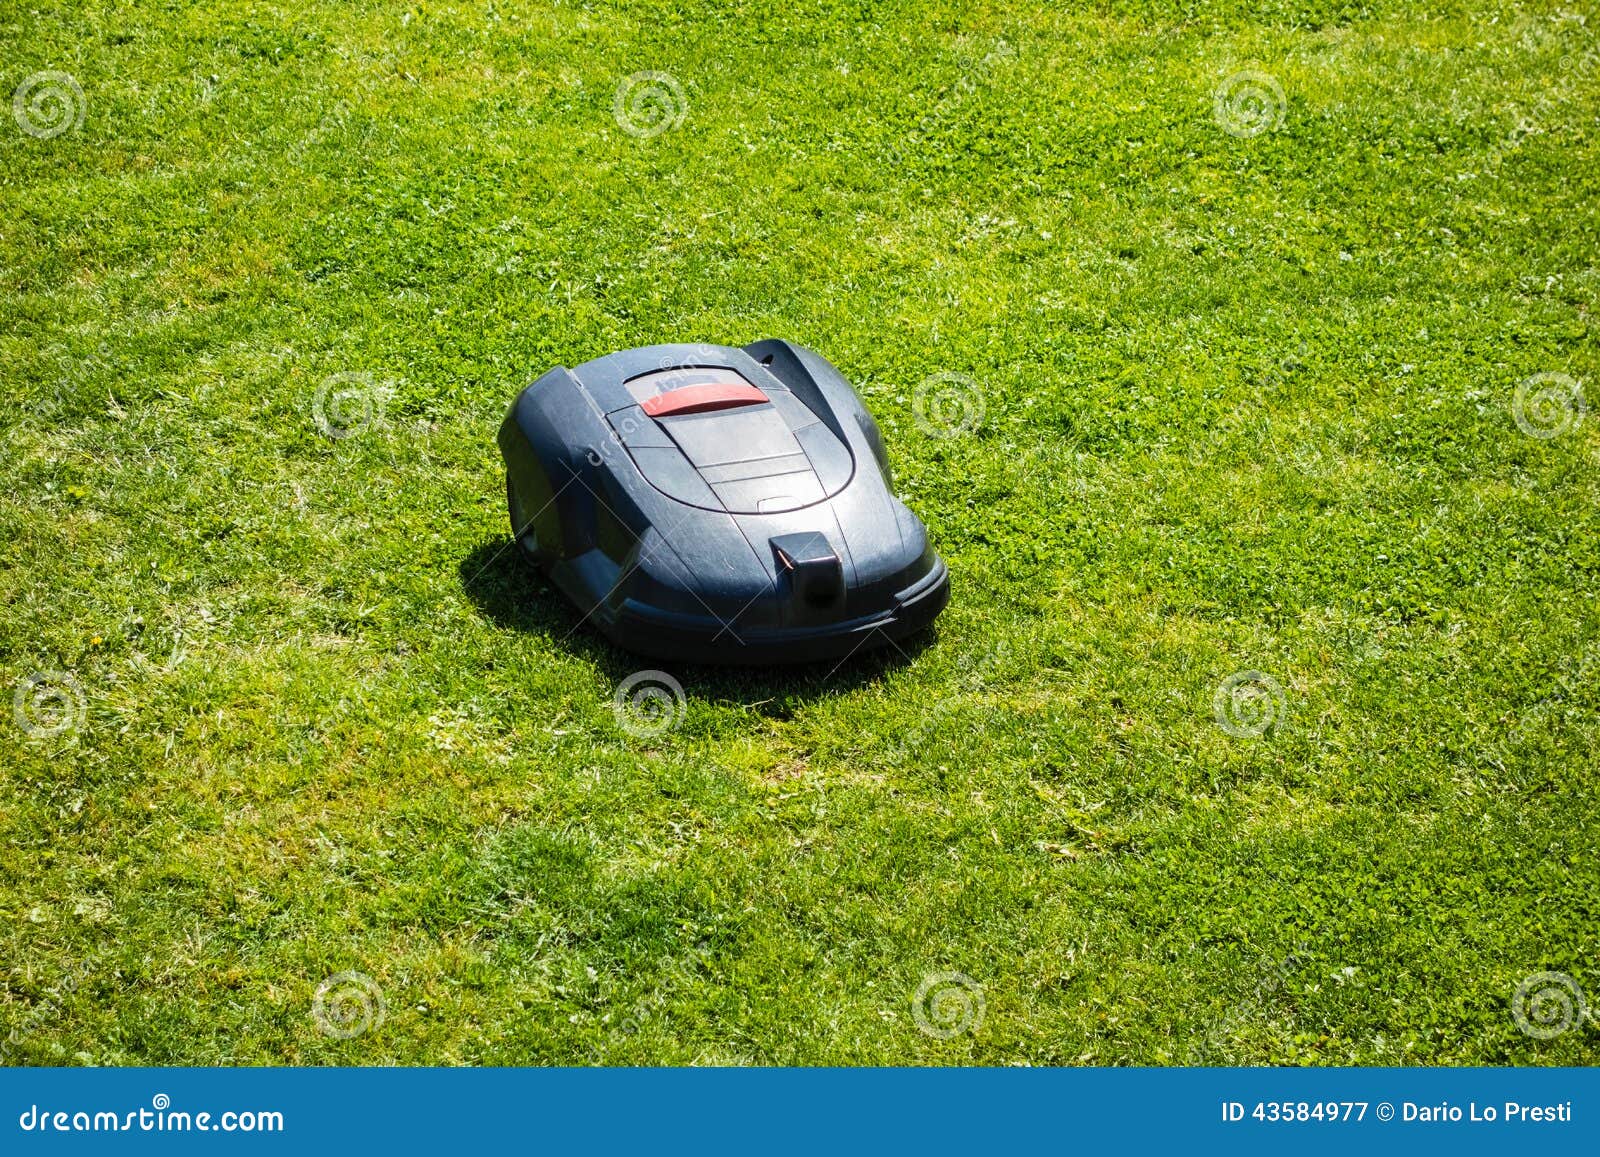 Automatic mower stock image. Image of field, auto, invention